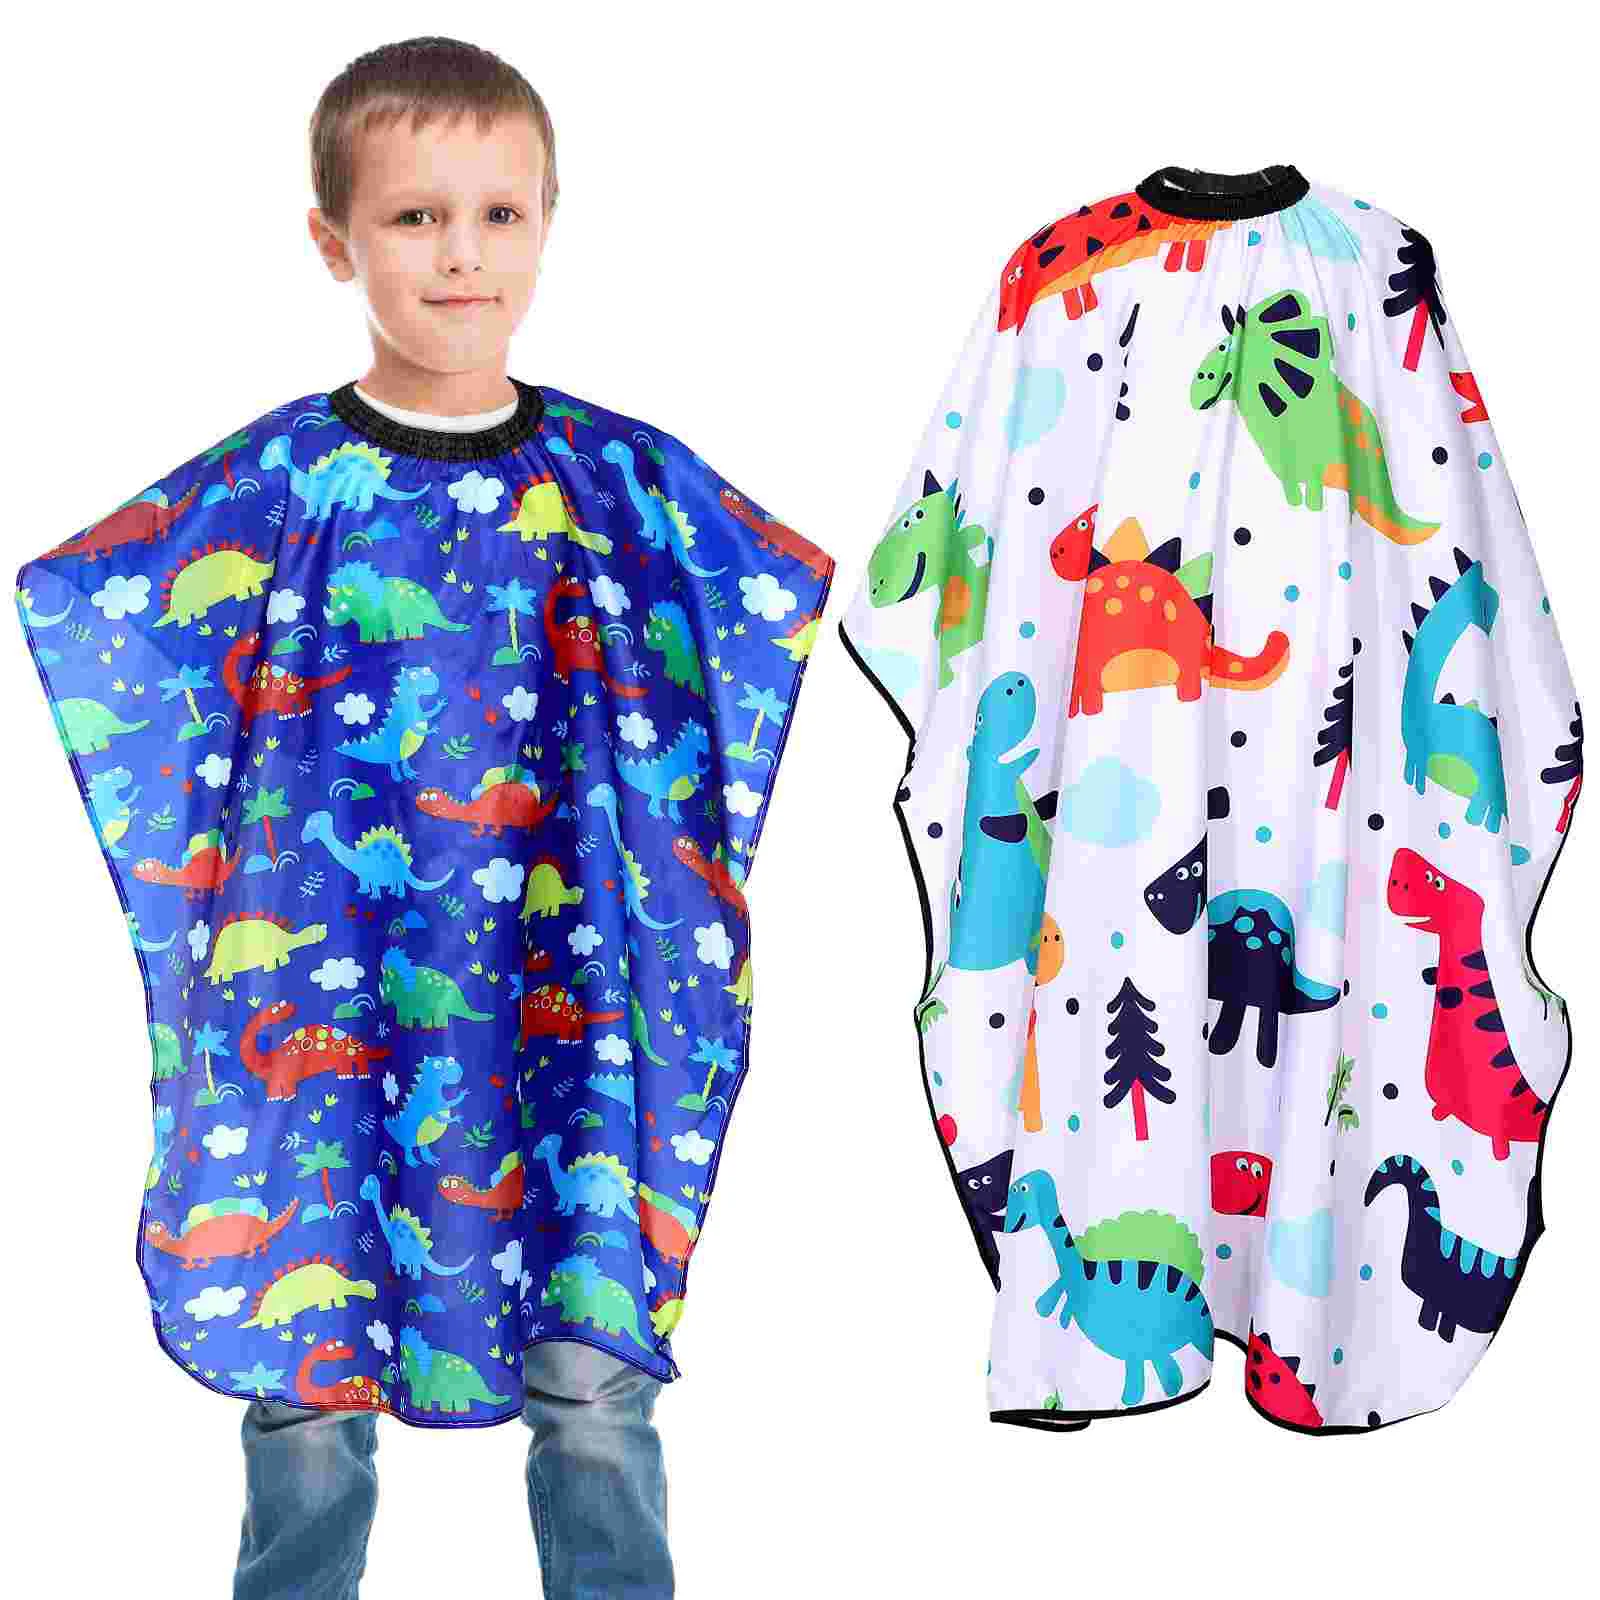 

Kids Cape Haircut Barber Hair Covers Cutting Haircutting Aprons Hairdressing Capes Salon Apron Cloak Gown Cover Stylingboys